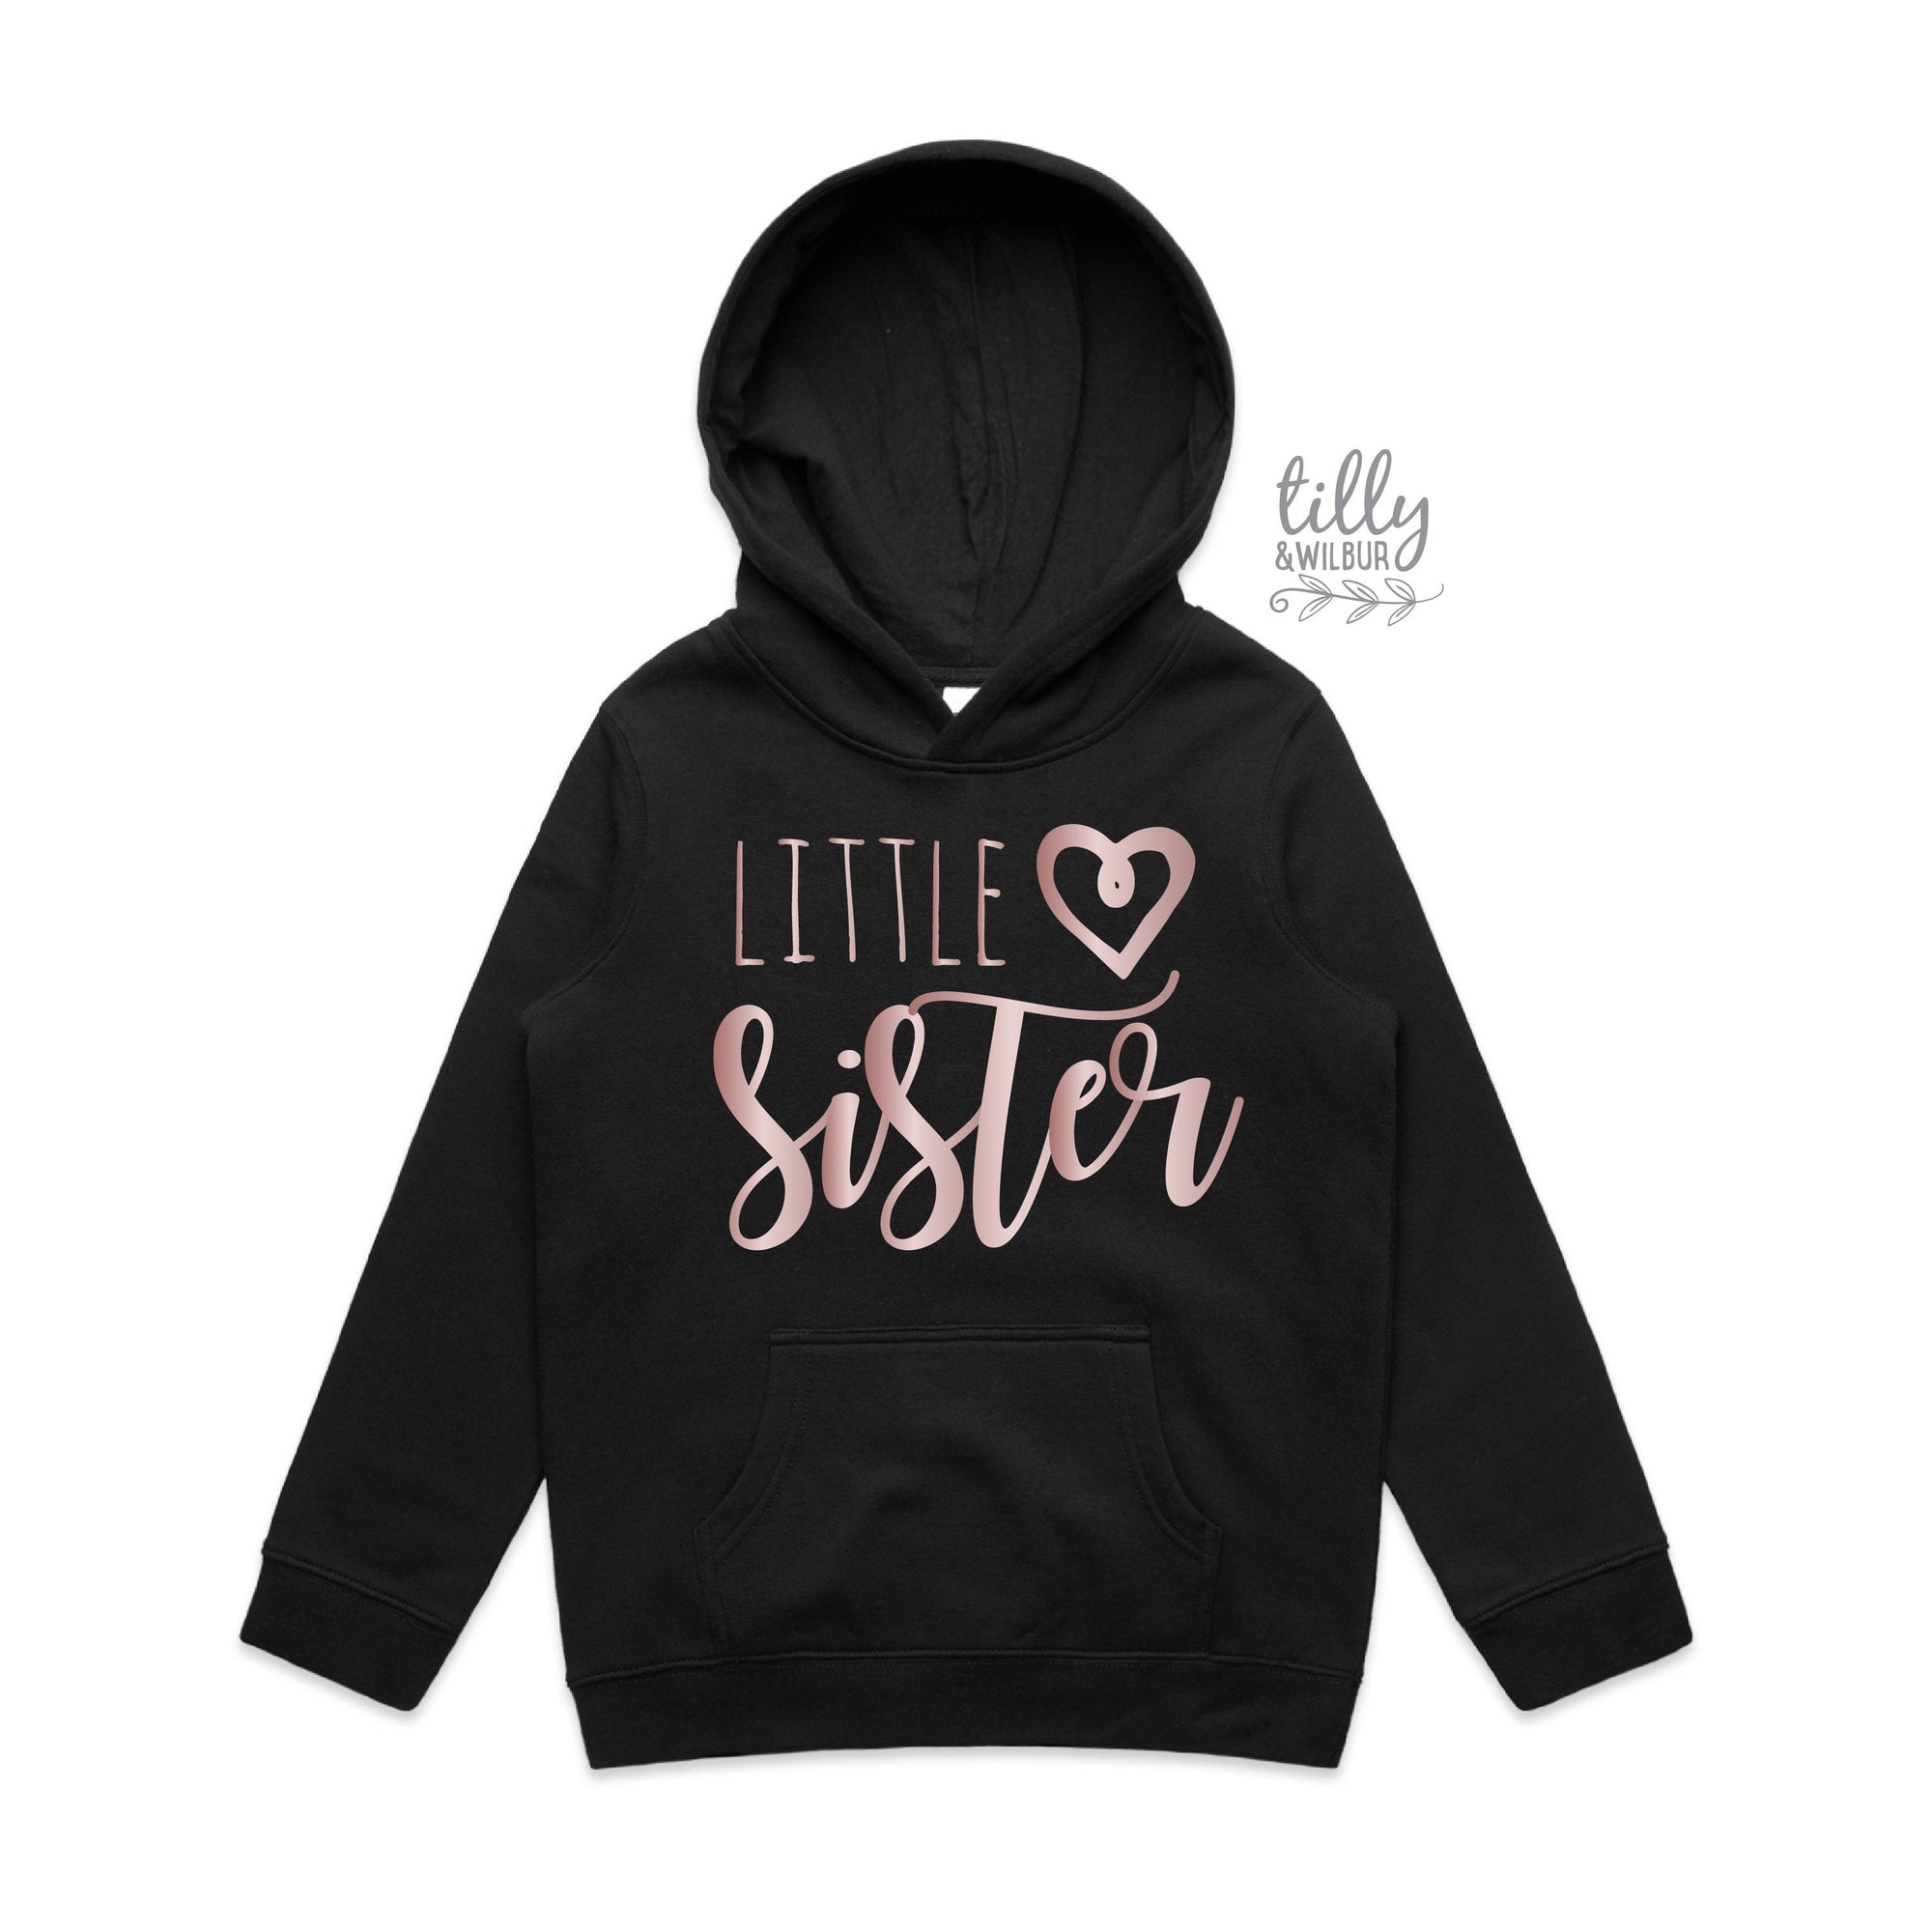 Little Sister Hoodie, Matching Sister Outfits, Sibling T-Shirts, Matching Big Sister Little Sister Shirts, New Baby Sister Gift, Newborn